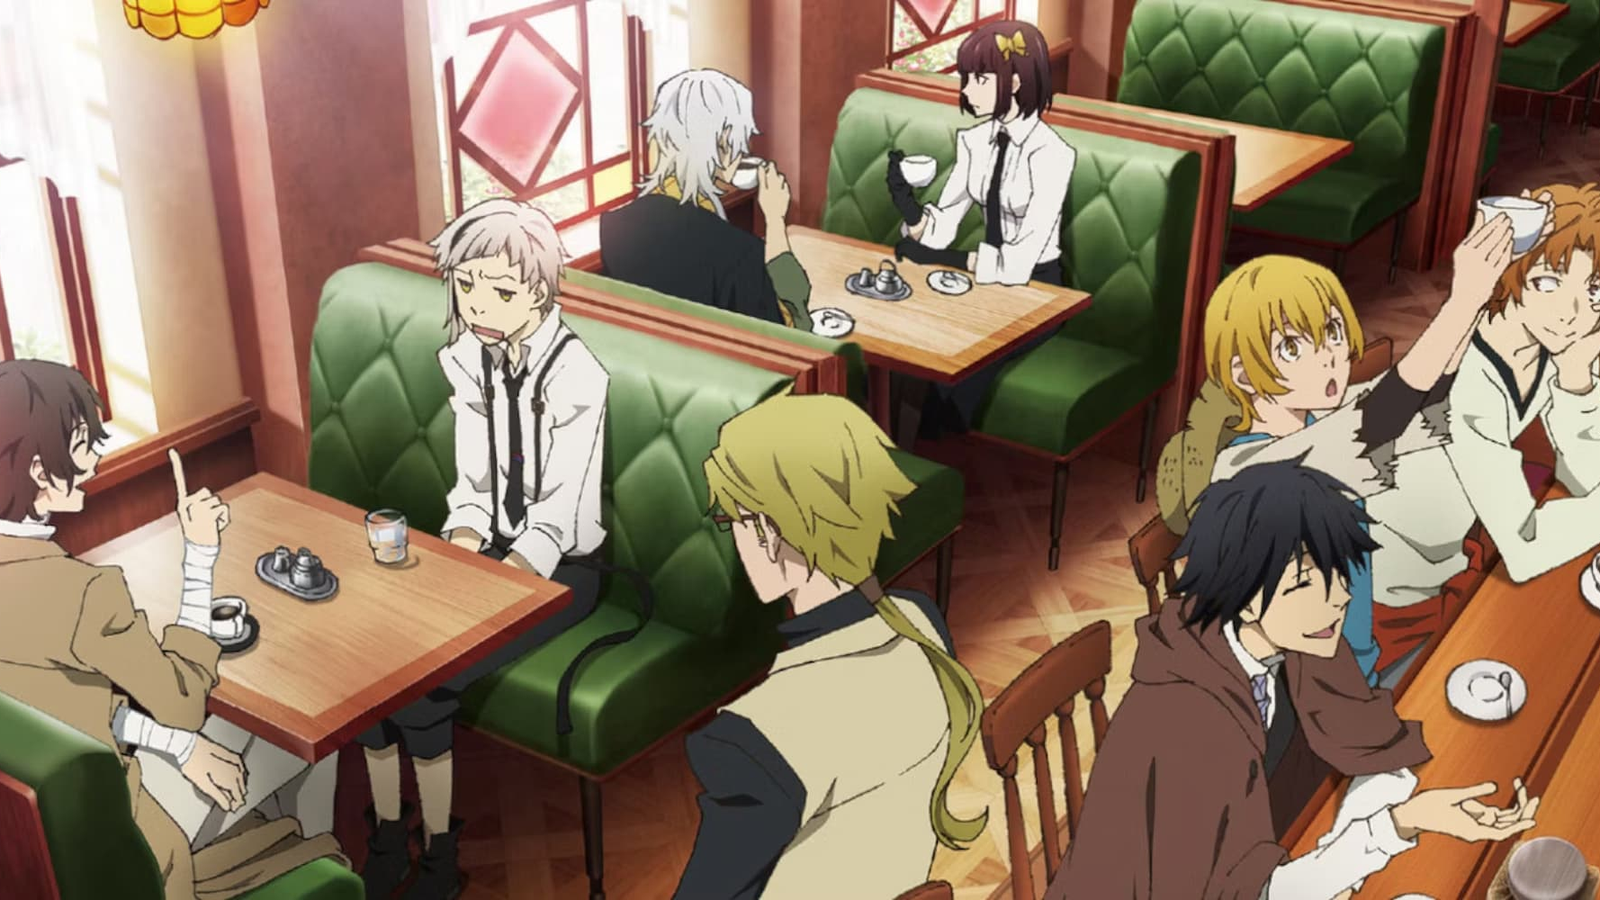 Anticipation Peaks: Is Bungo Stray Dogs Ready to Unleash a Riveting Season 6?